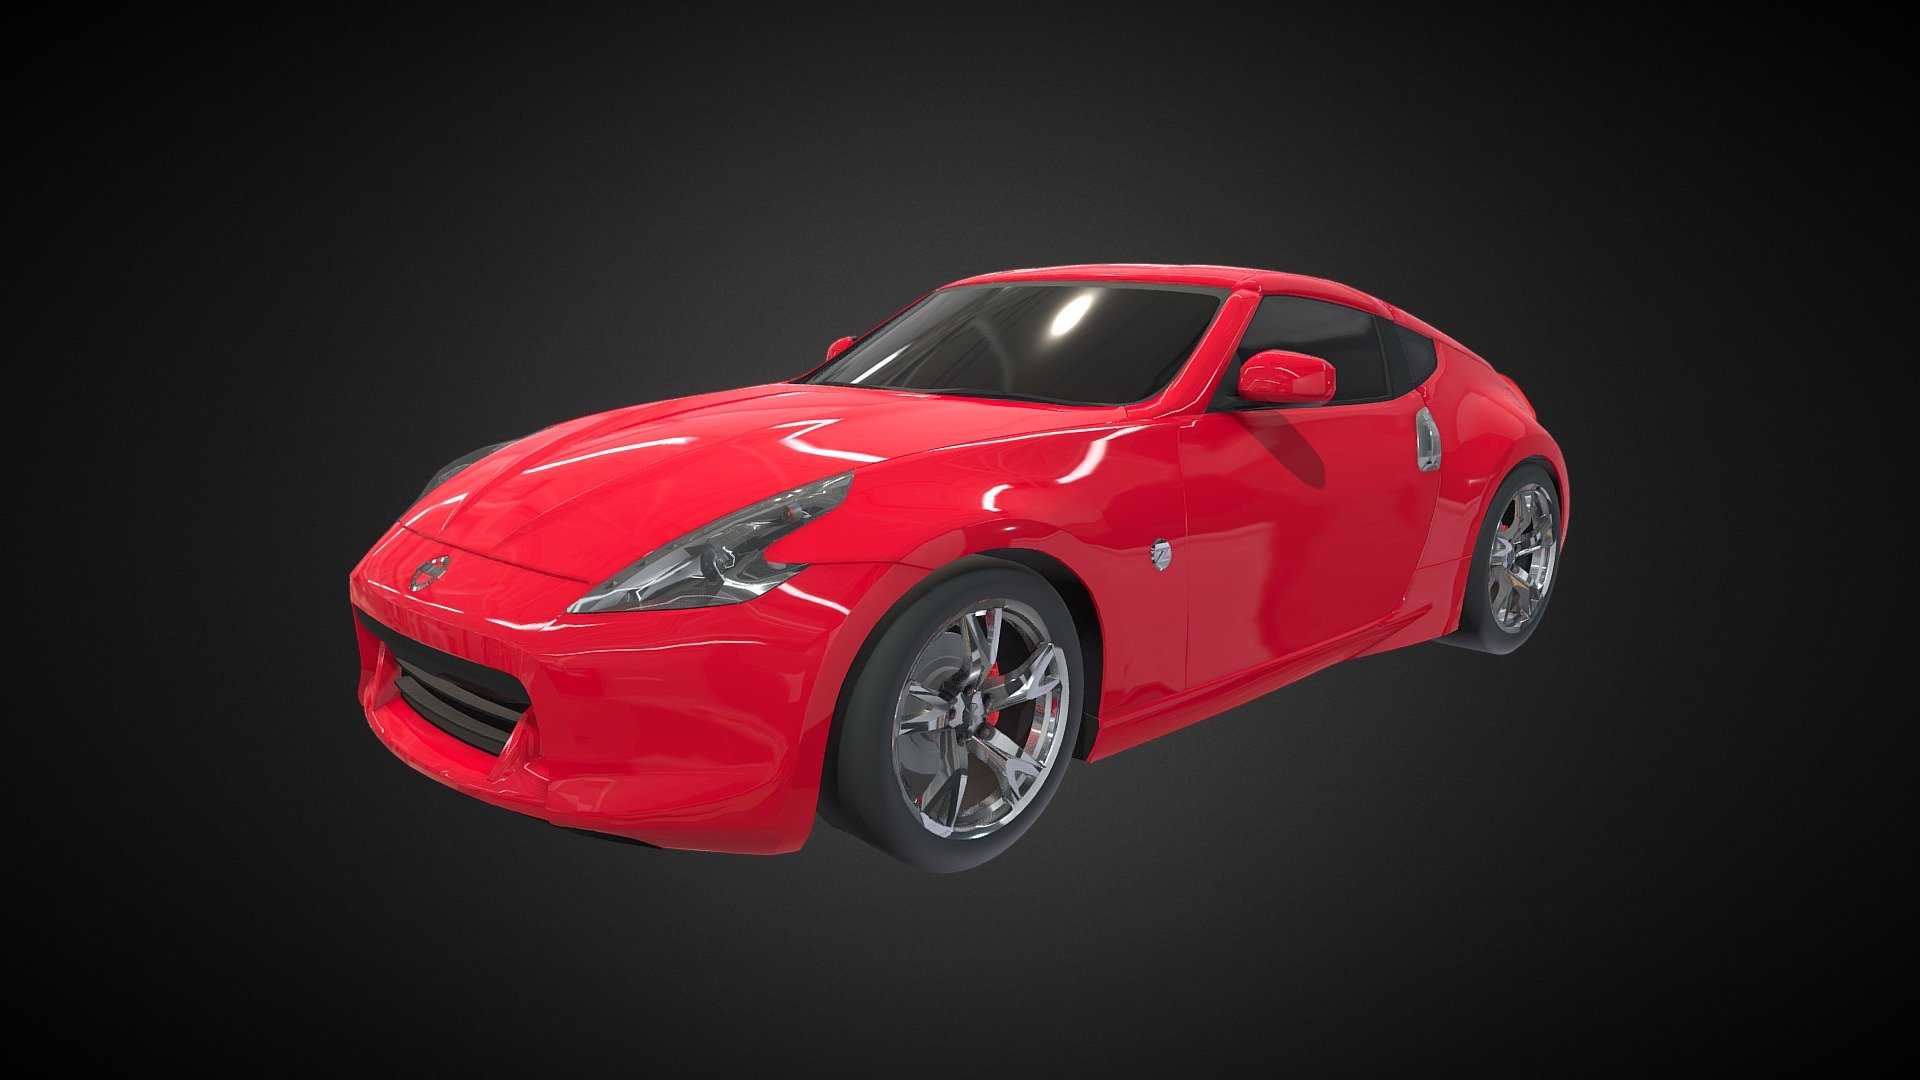 Low poly model, 370z game dev ready - download

The Nissan 370Z (known as the Fairlady Z Z34 in Japan) is a 2-door, 2-seater sports car (S-segment in Europe) manufactured by Nissan Motor Company.[2] It was announced on October 29, 2006, and was first shown at an event in Los Angeles ahead of the 2008 Greater LA Auto Show,[3] before being officially unveiled at the show itself.[4][5] The 370Z is the sixth generation of the Nissan Z-car line, succeeding the 350Z. The 370Z marks the last production car with a naturally aspirated and high-rev V6 coupled to a manual transmission. The 2020 model year was the final model year for the 370Z.[6] The line was continued by the Nissan Z (RZ34) on a modified version of the same platform.

source: Wikipedia - Nissan 370z [Download] - Buy Royalty Free 3D model by Hermes - 3D Assets (@BrunoHermes) 3d model